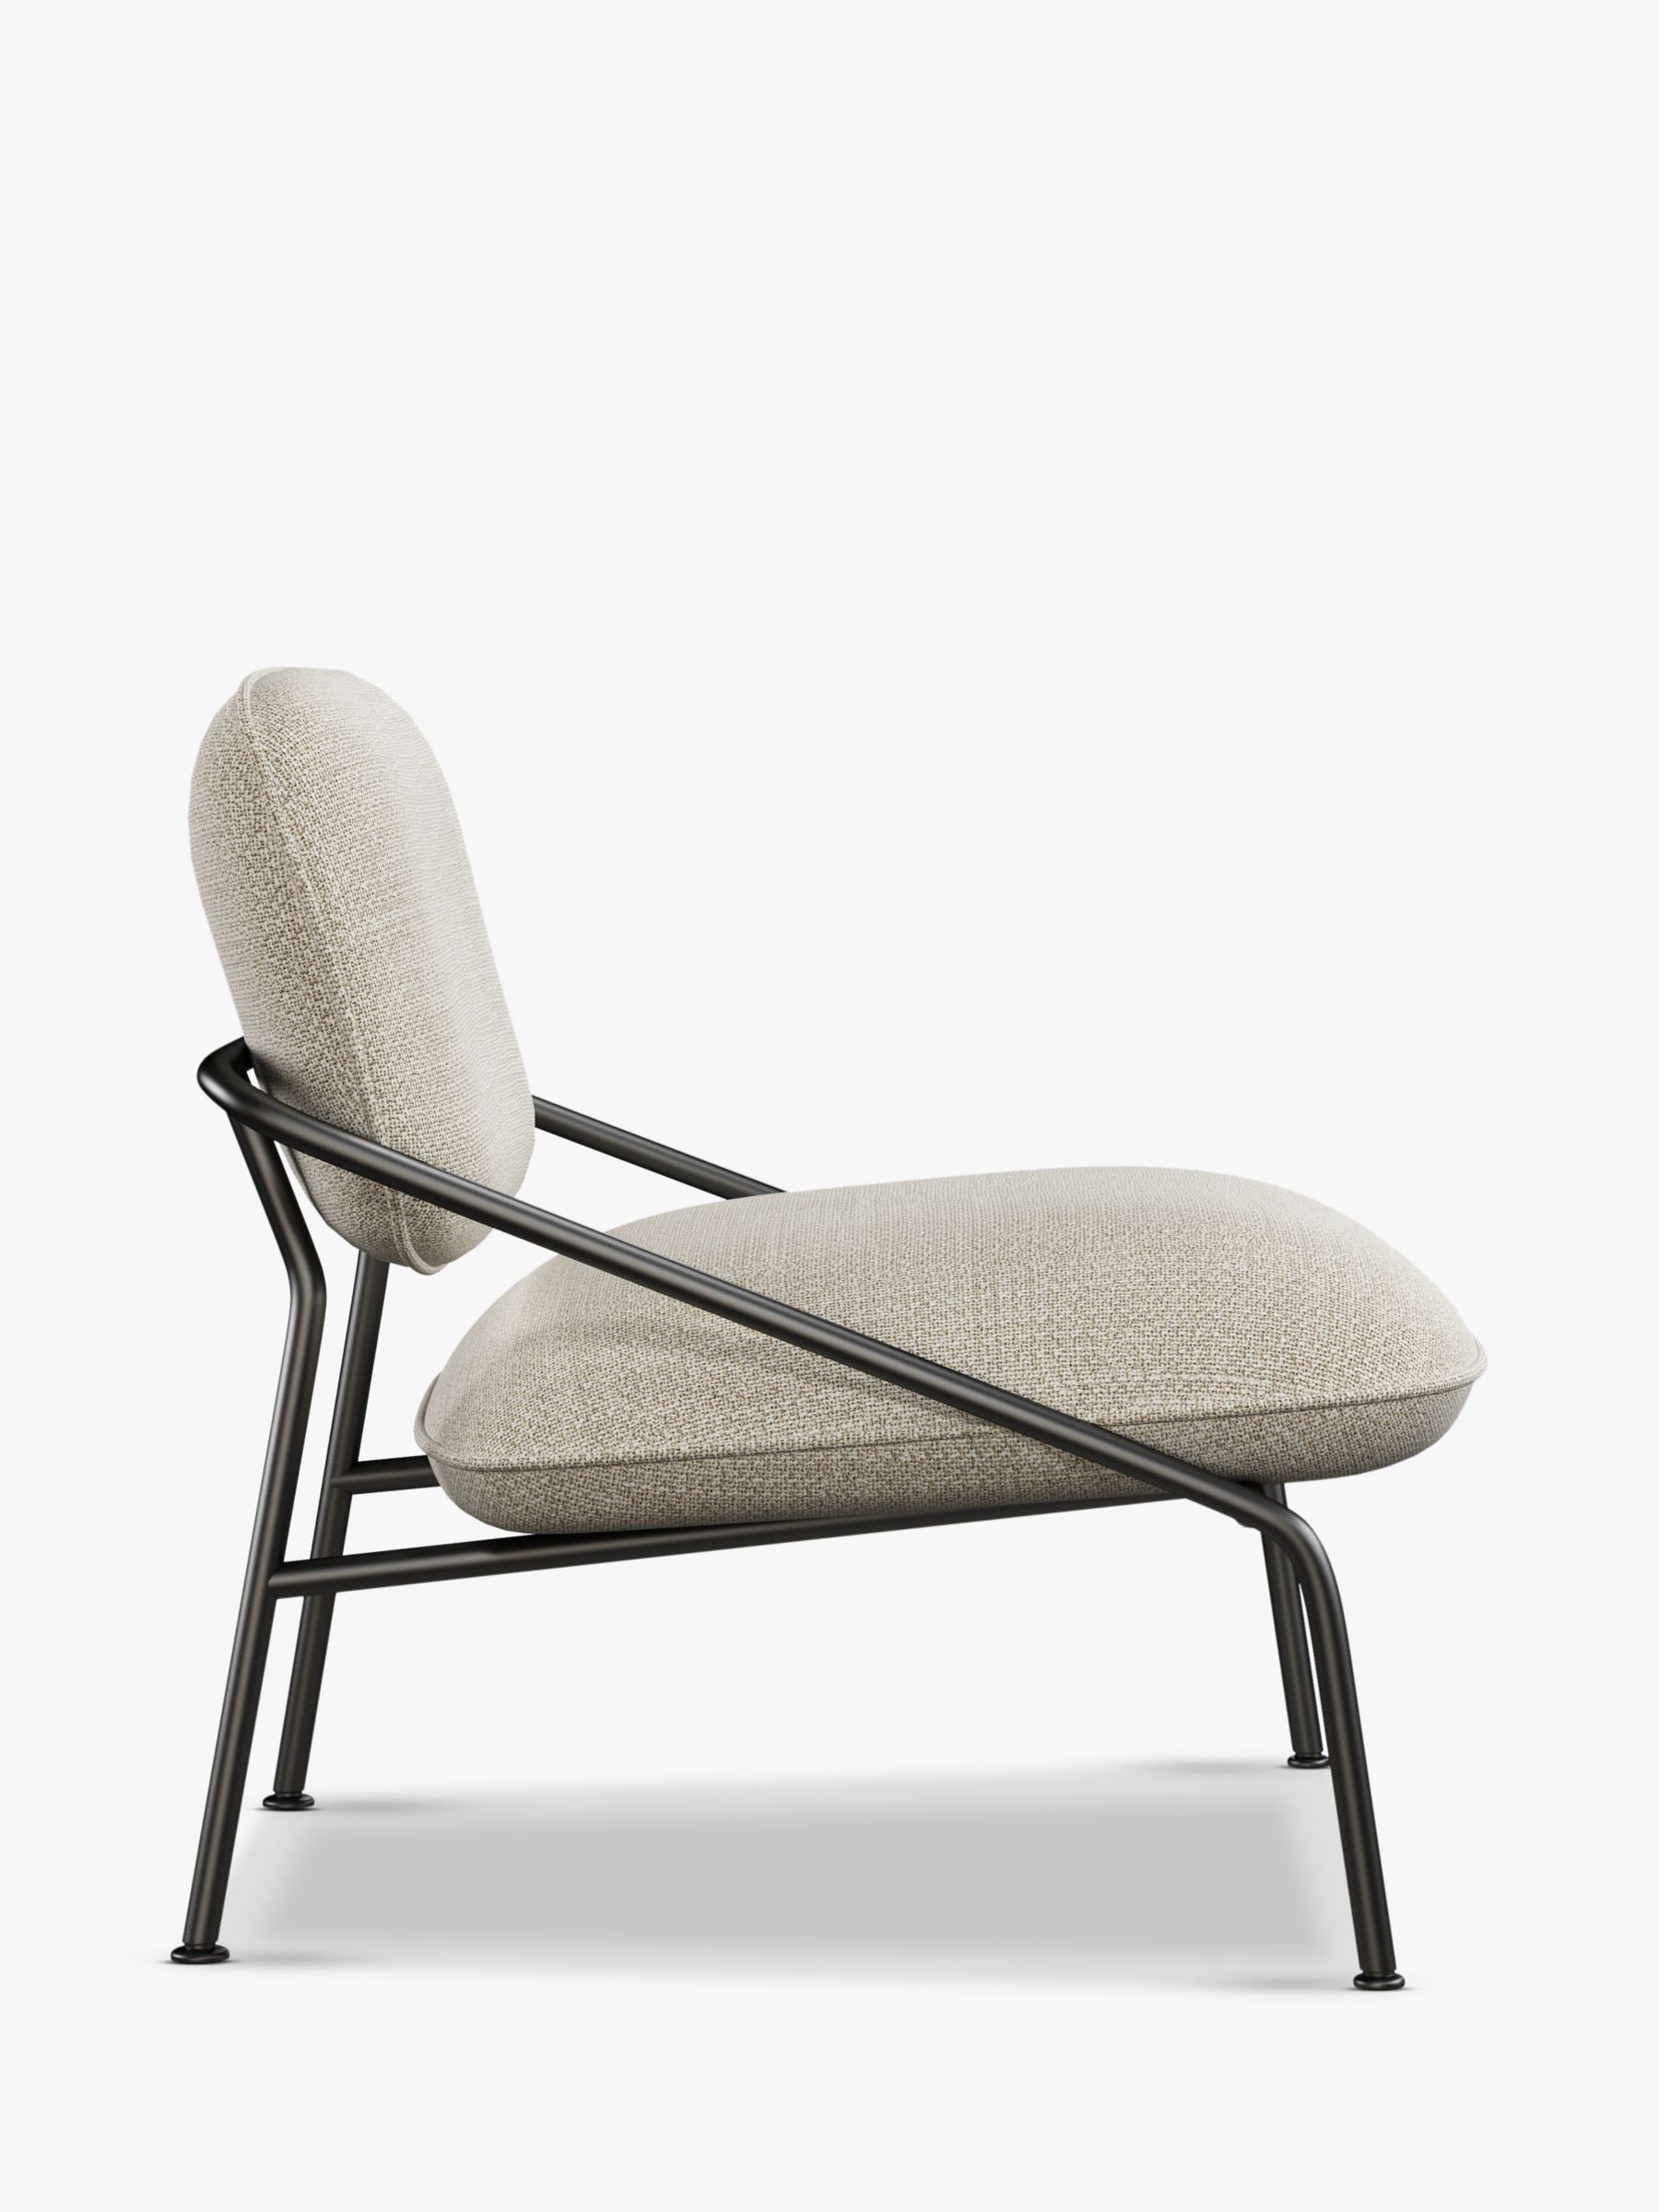 ANYDAY John Lewis & Partners Slipper Lounge Chair